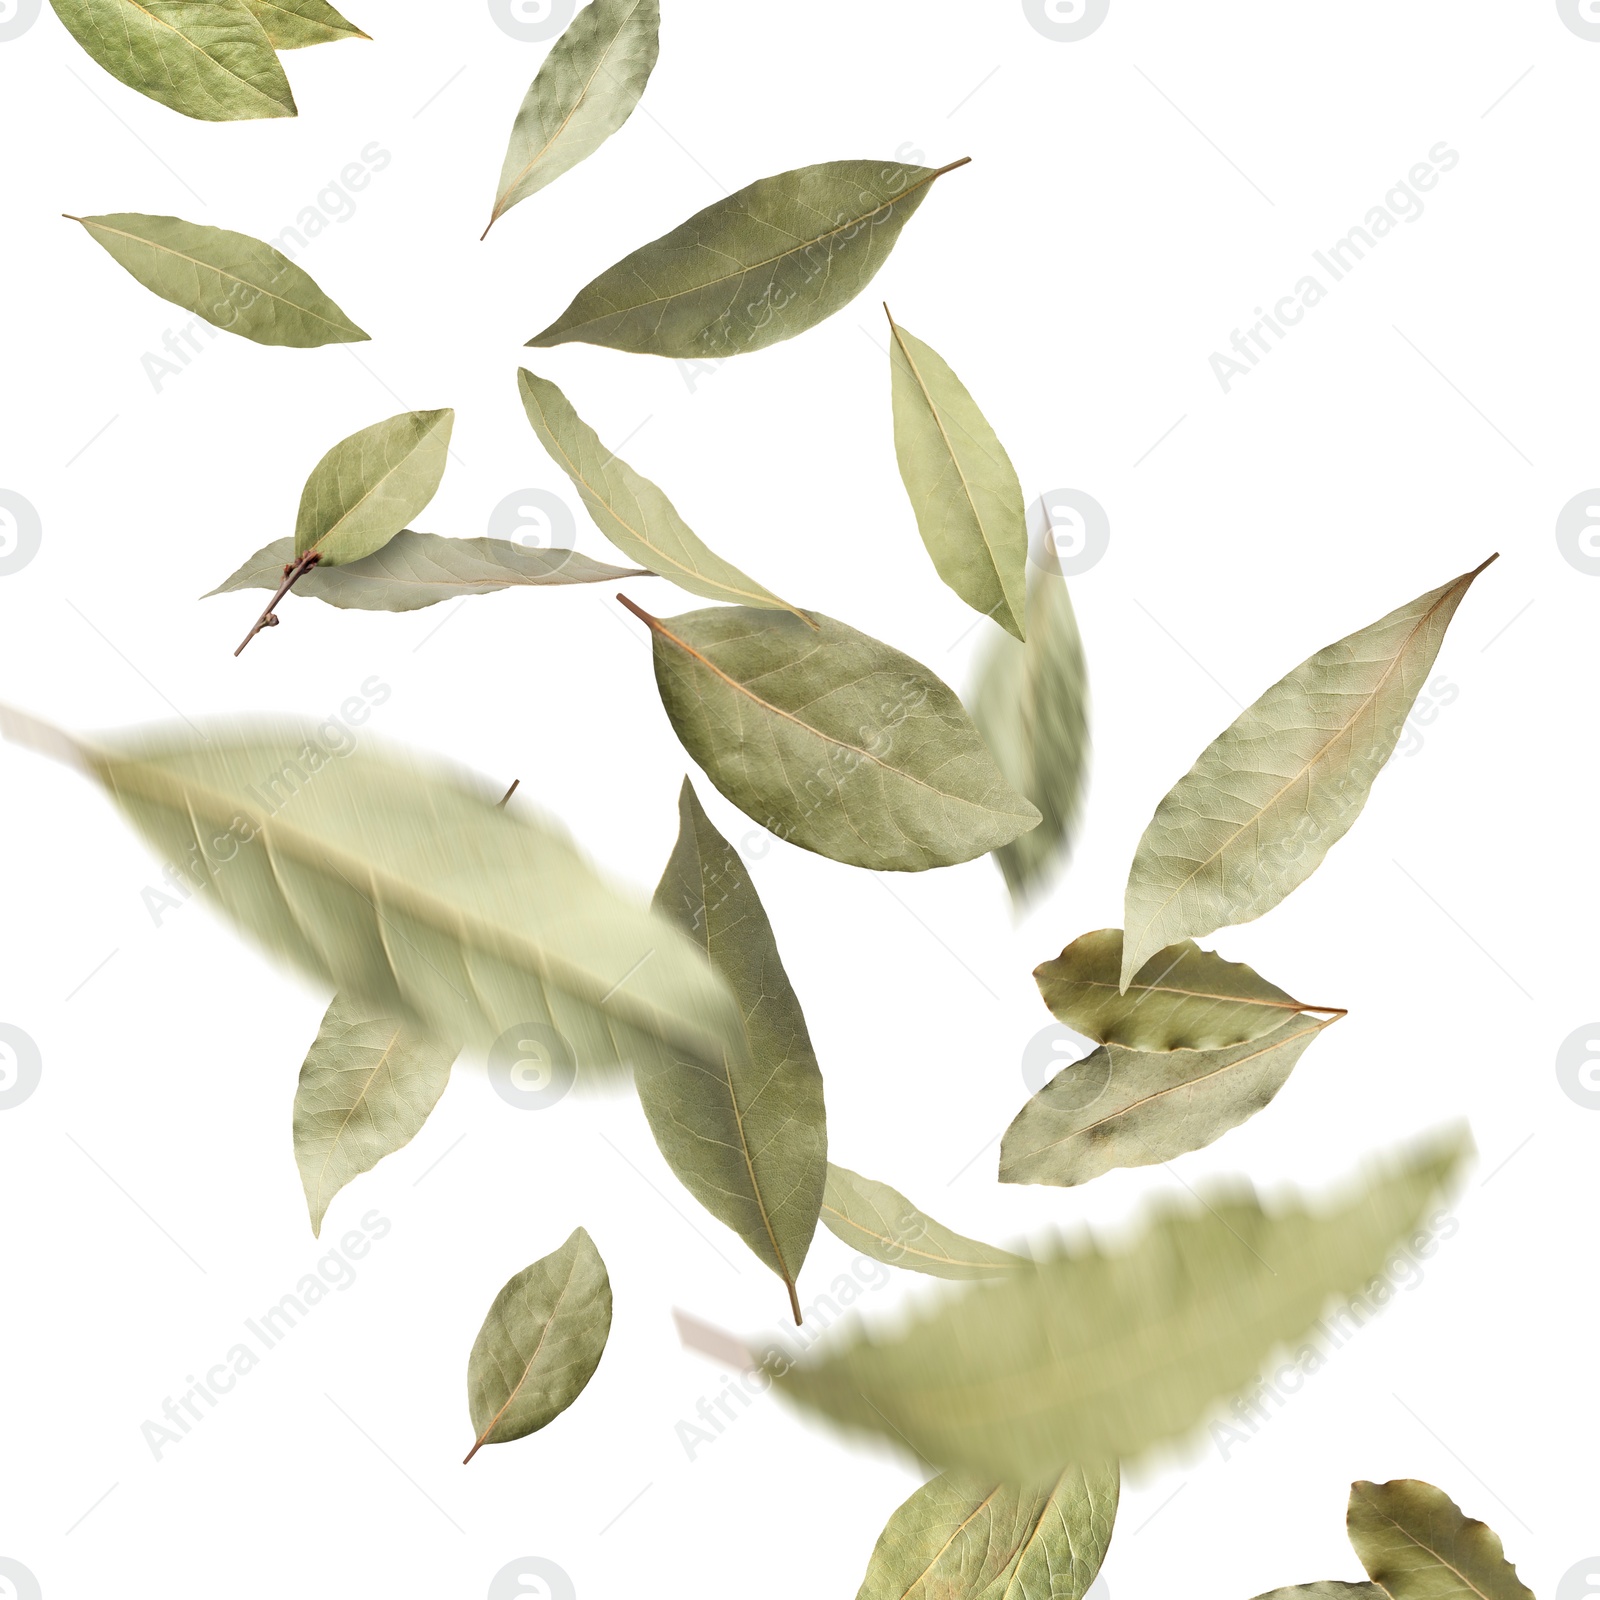 Image of Dry bay leaves falling on white background